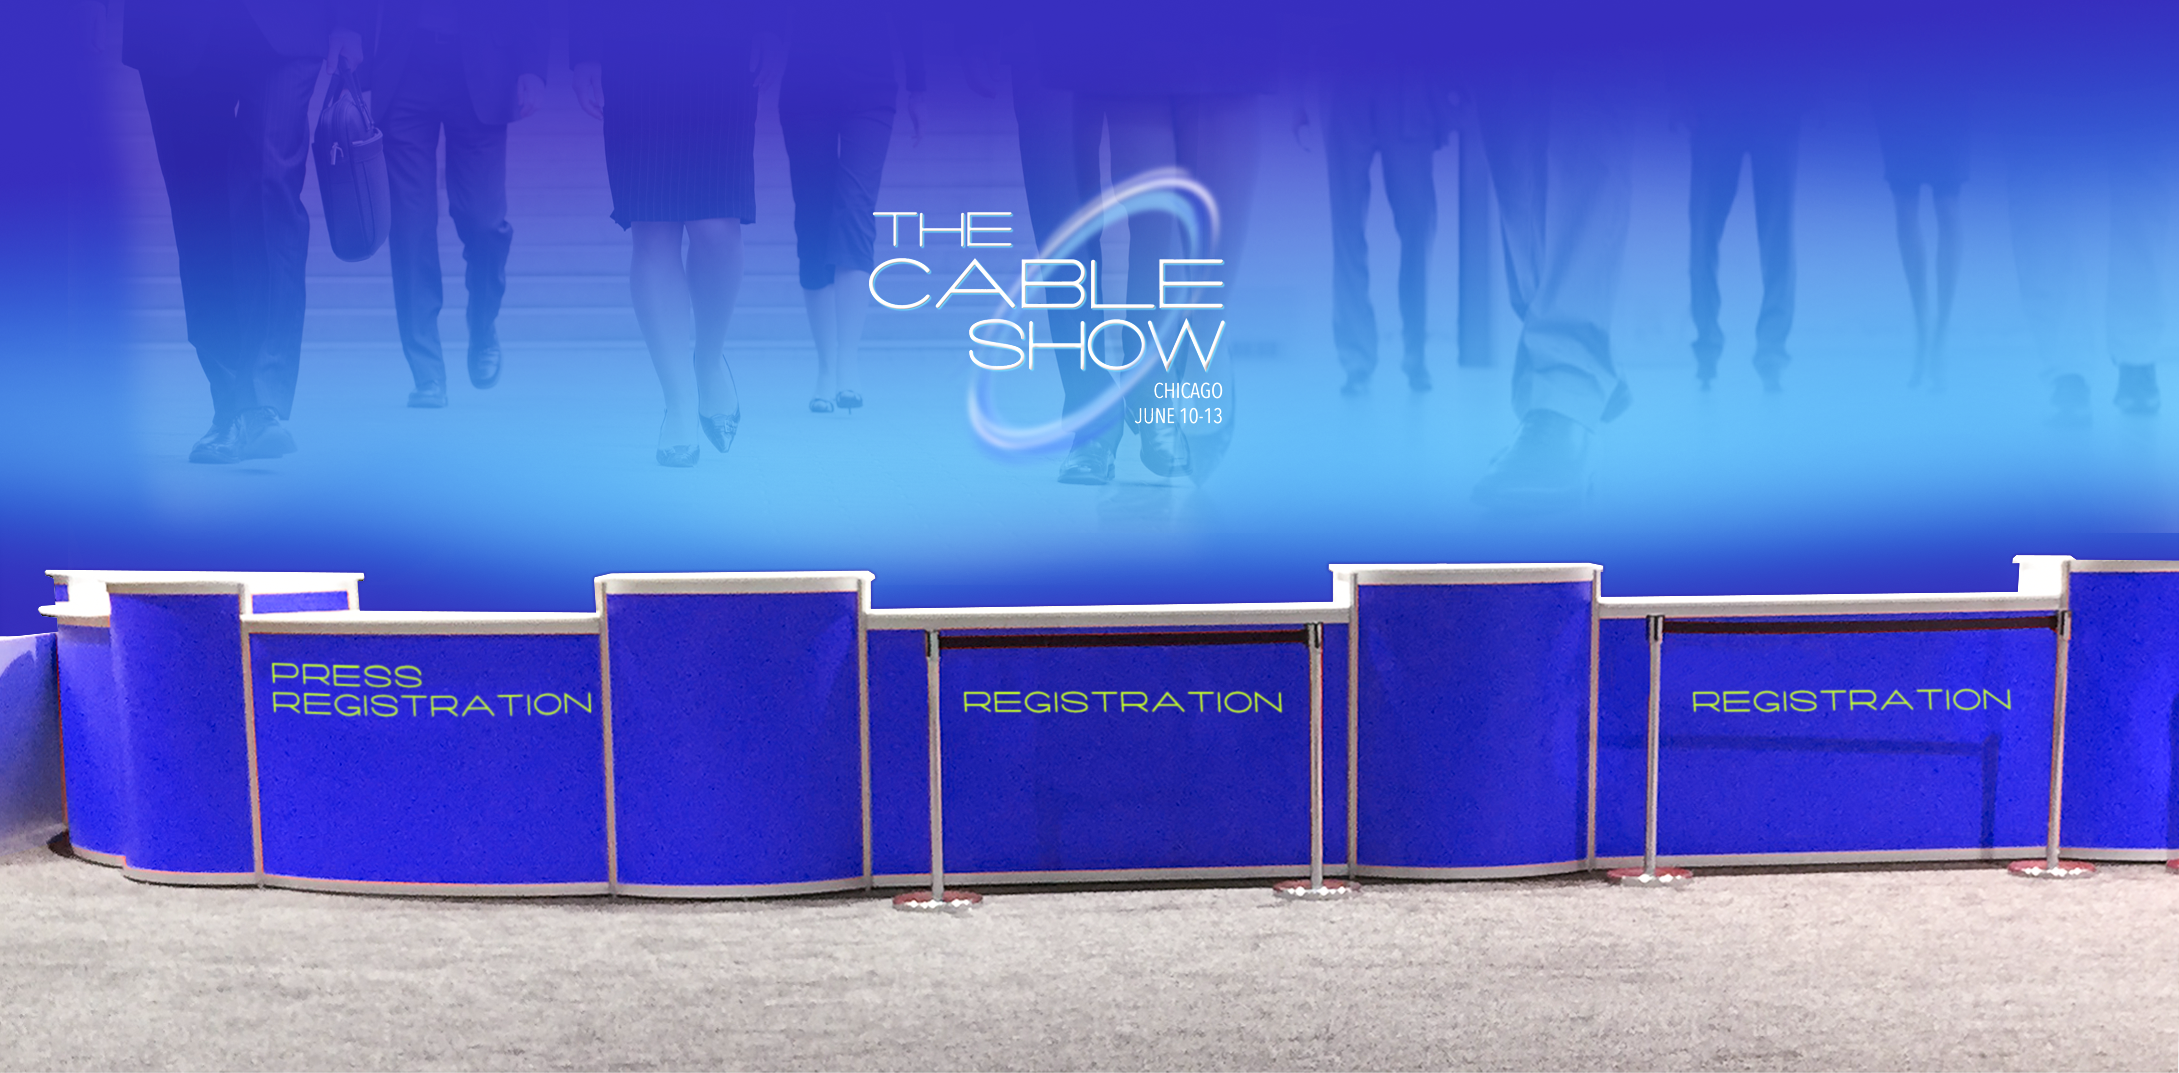 Image of Cable Show Registration Center